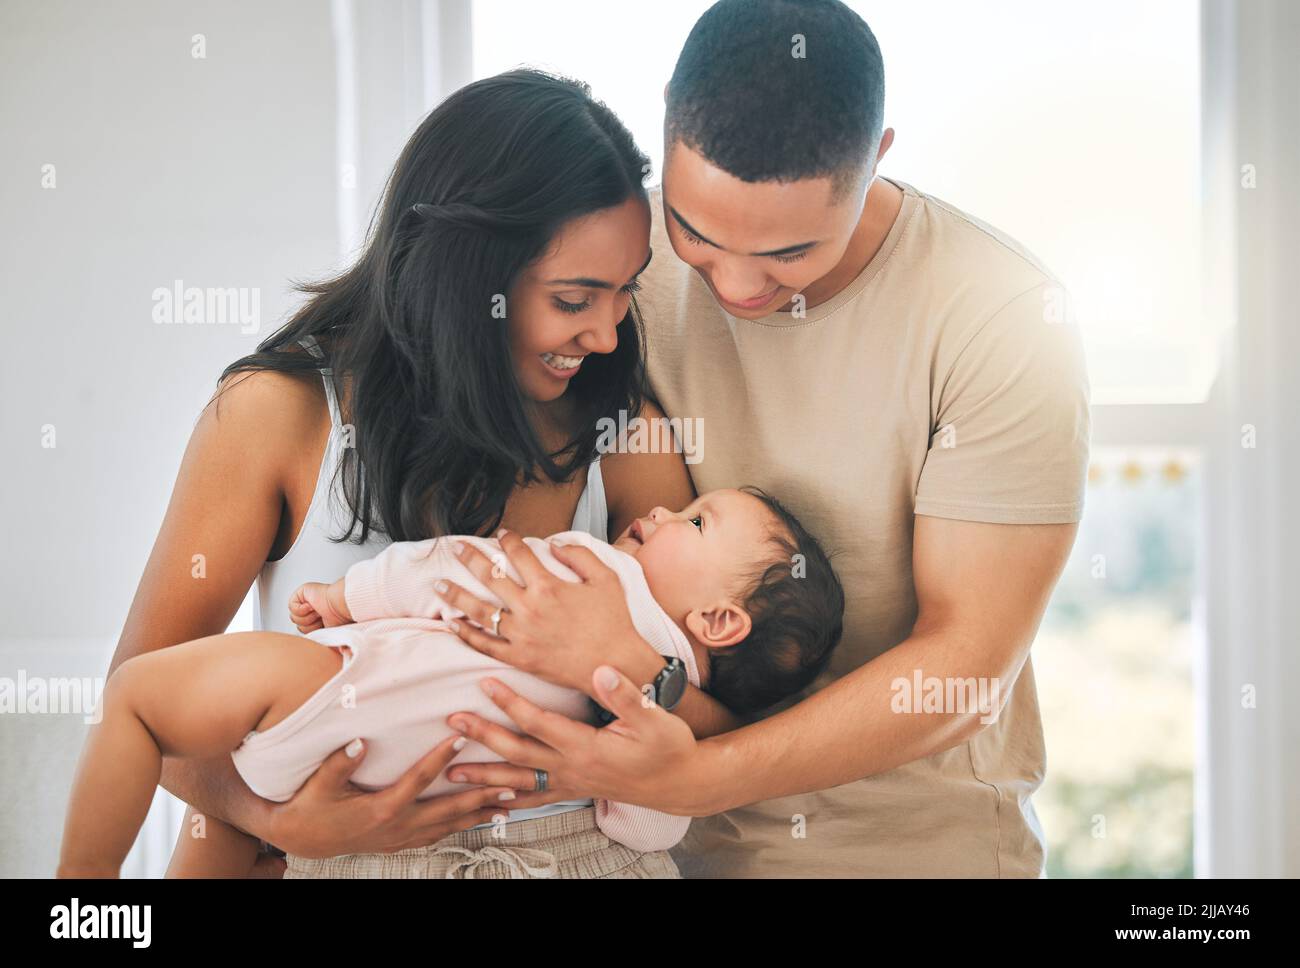 Their own little family. an affectionate young couple and their newborn baby at home. Stock Photo